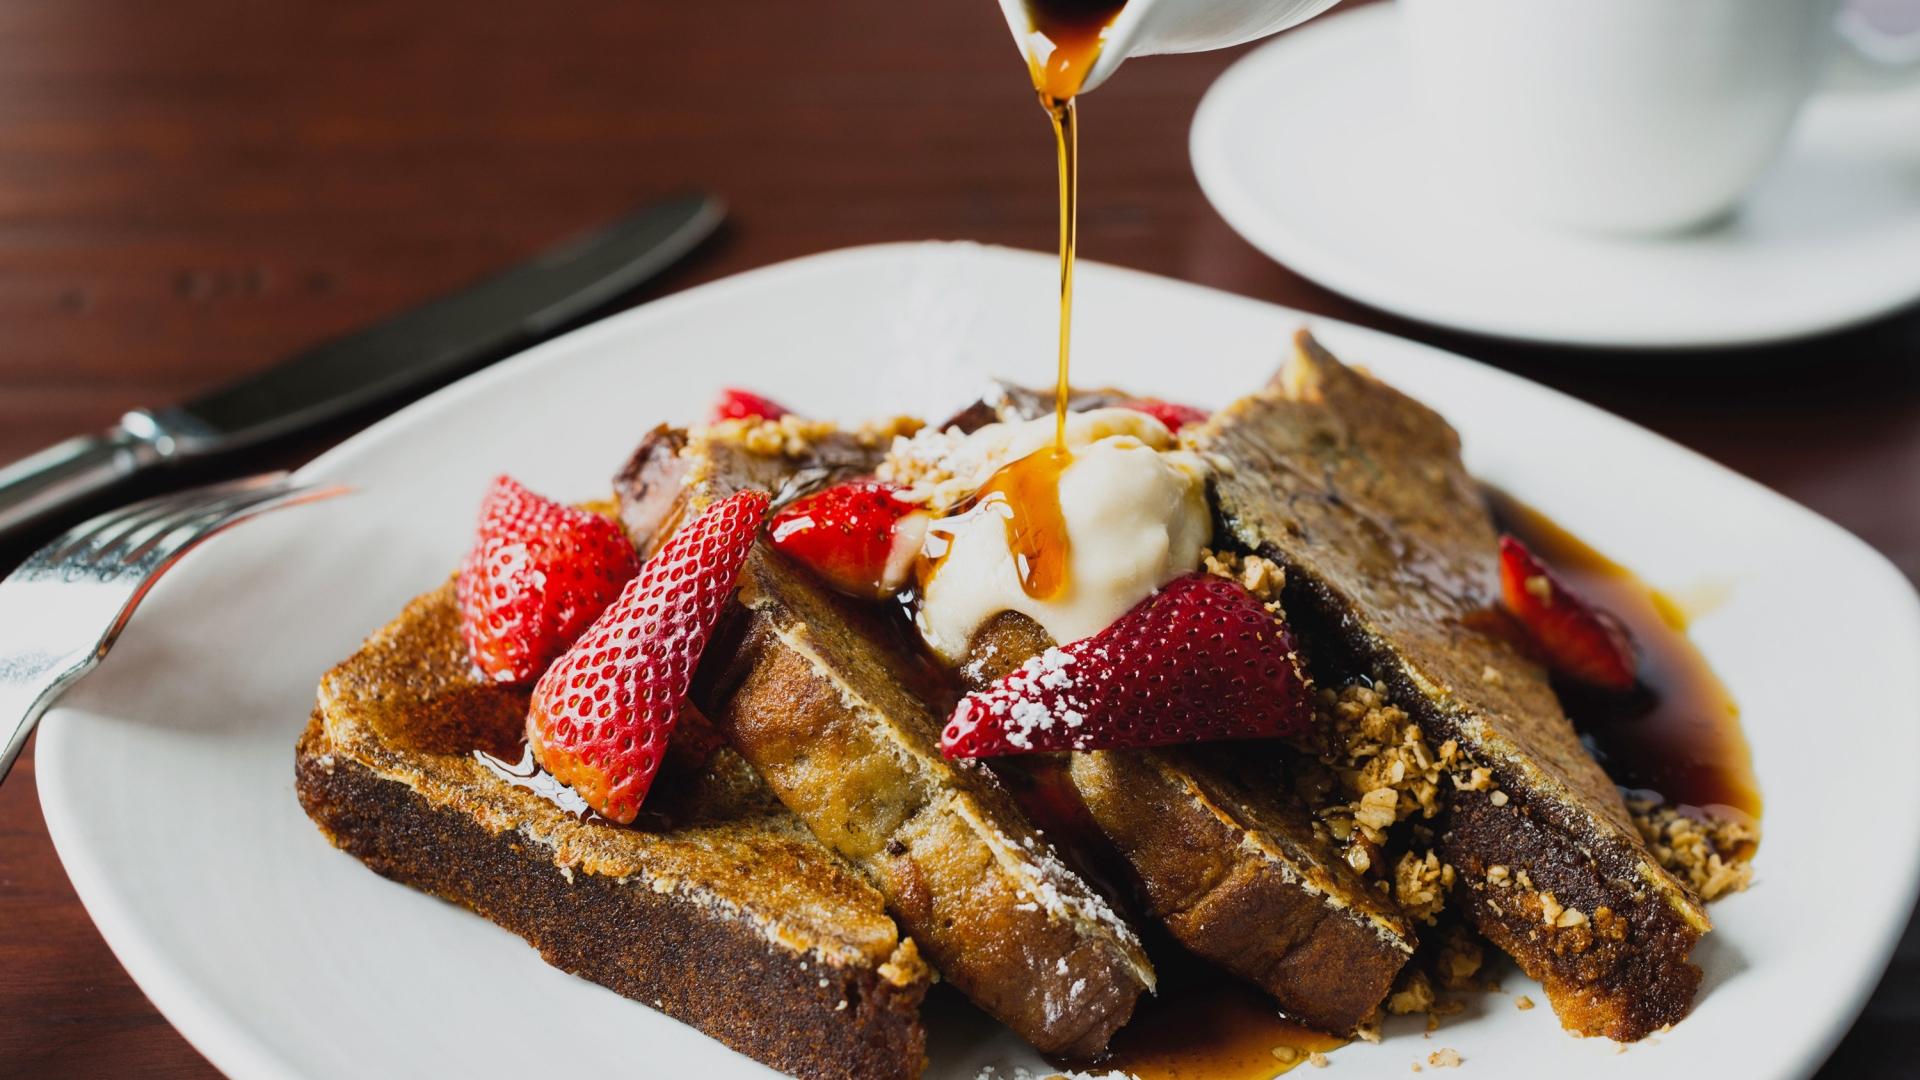 A plate of French toast topped with fresh strawberries and syrup.